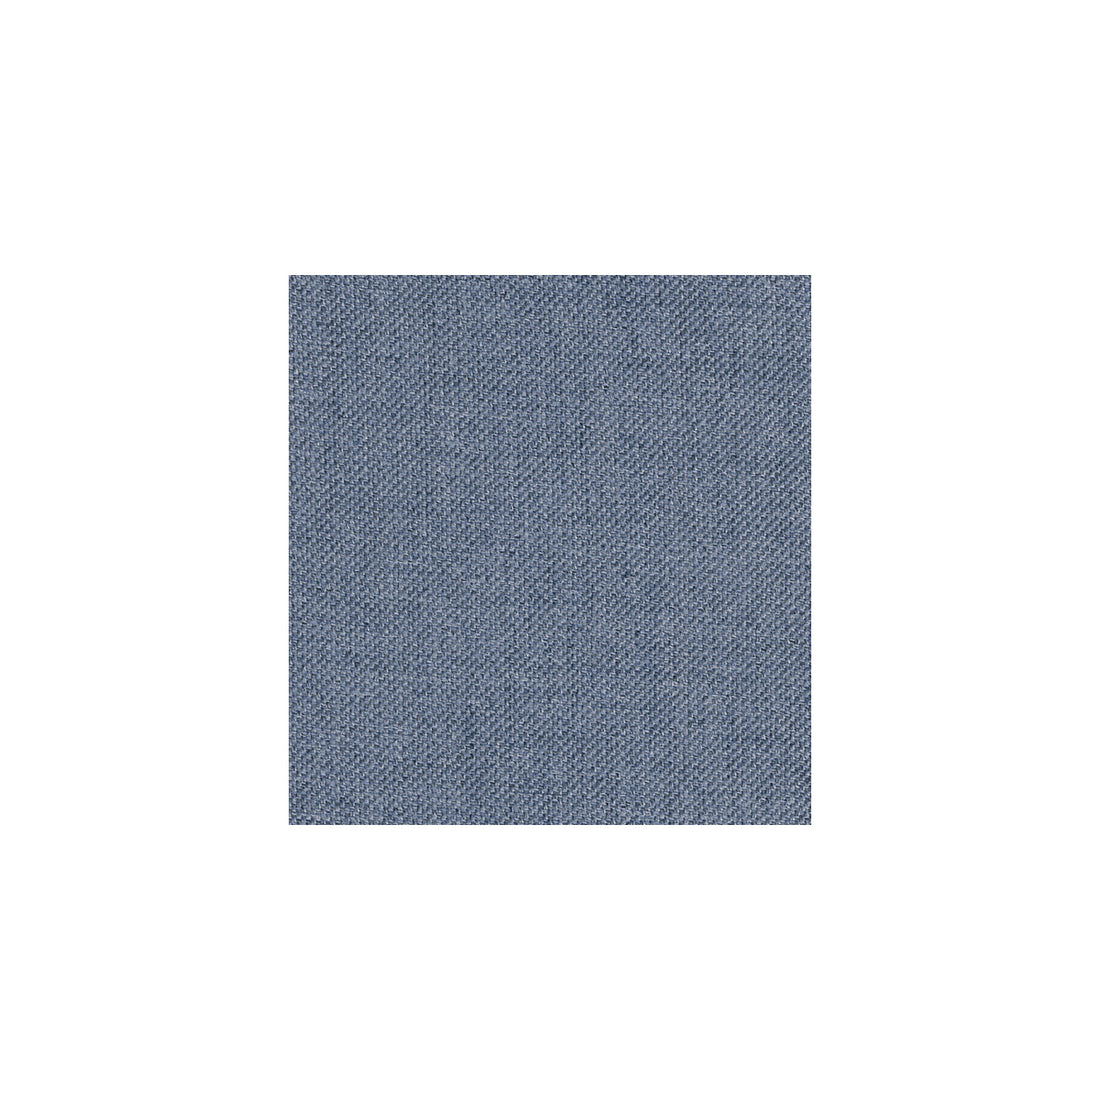 Whitney fabric in chambray color - pattern 26852.505.0 - by Kravet Basics